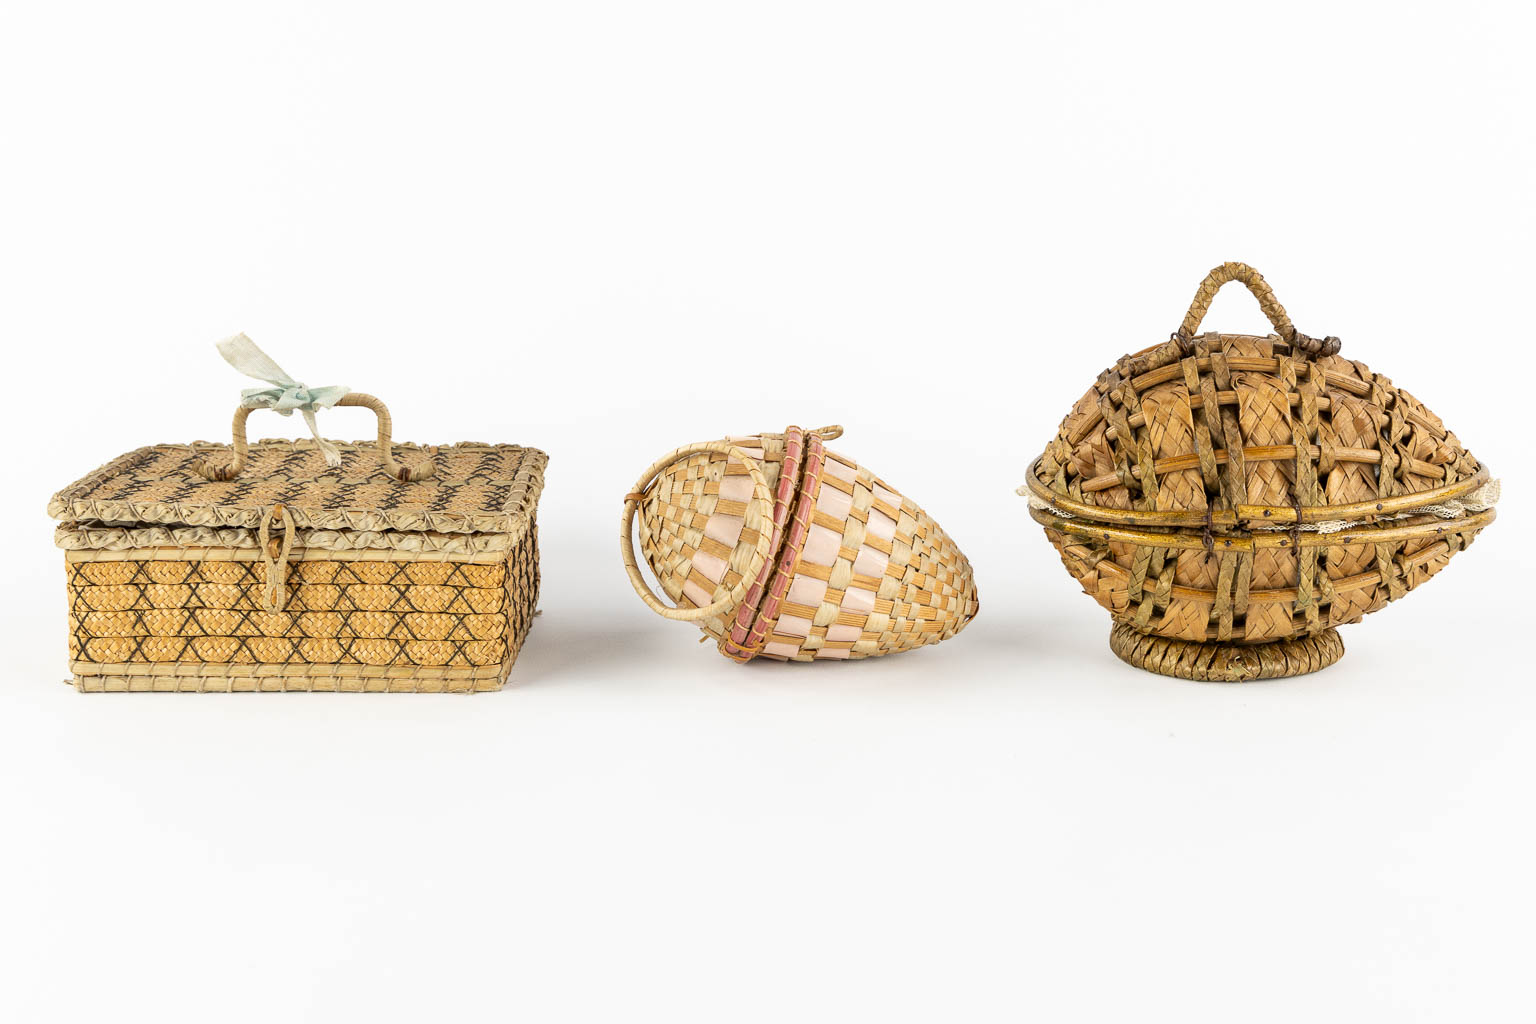 Three antique dolls, stored in a woven basket. (L:11,5 x W:17 x H:7 cm) - Image 3 of 13